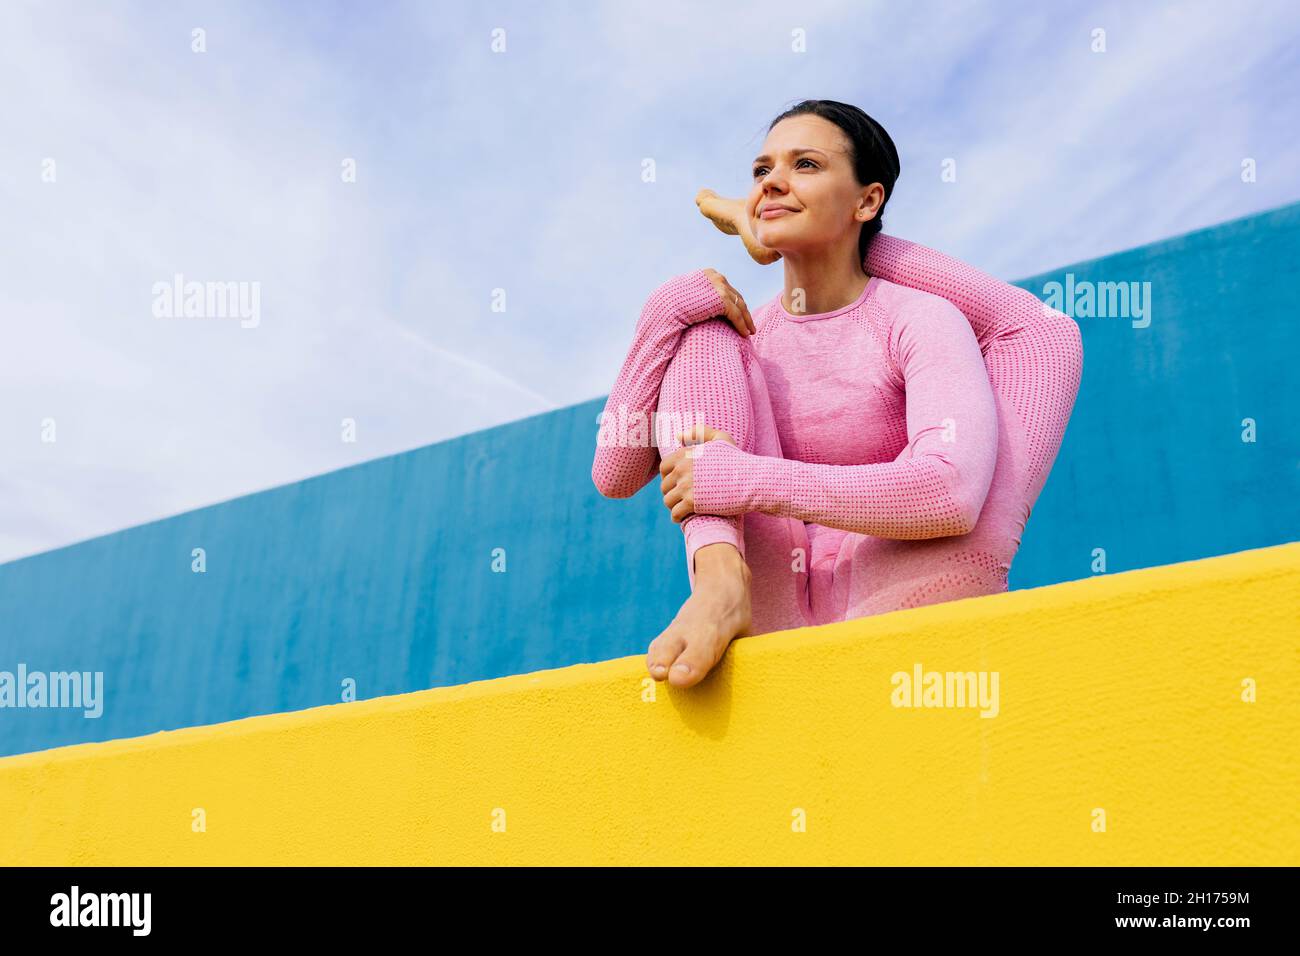 Young pensive female doing variation of Baby Cradle pose while meditating in yoga asana on blue and yellow background Stock Photo